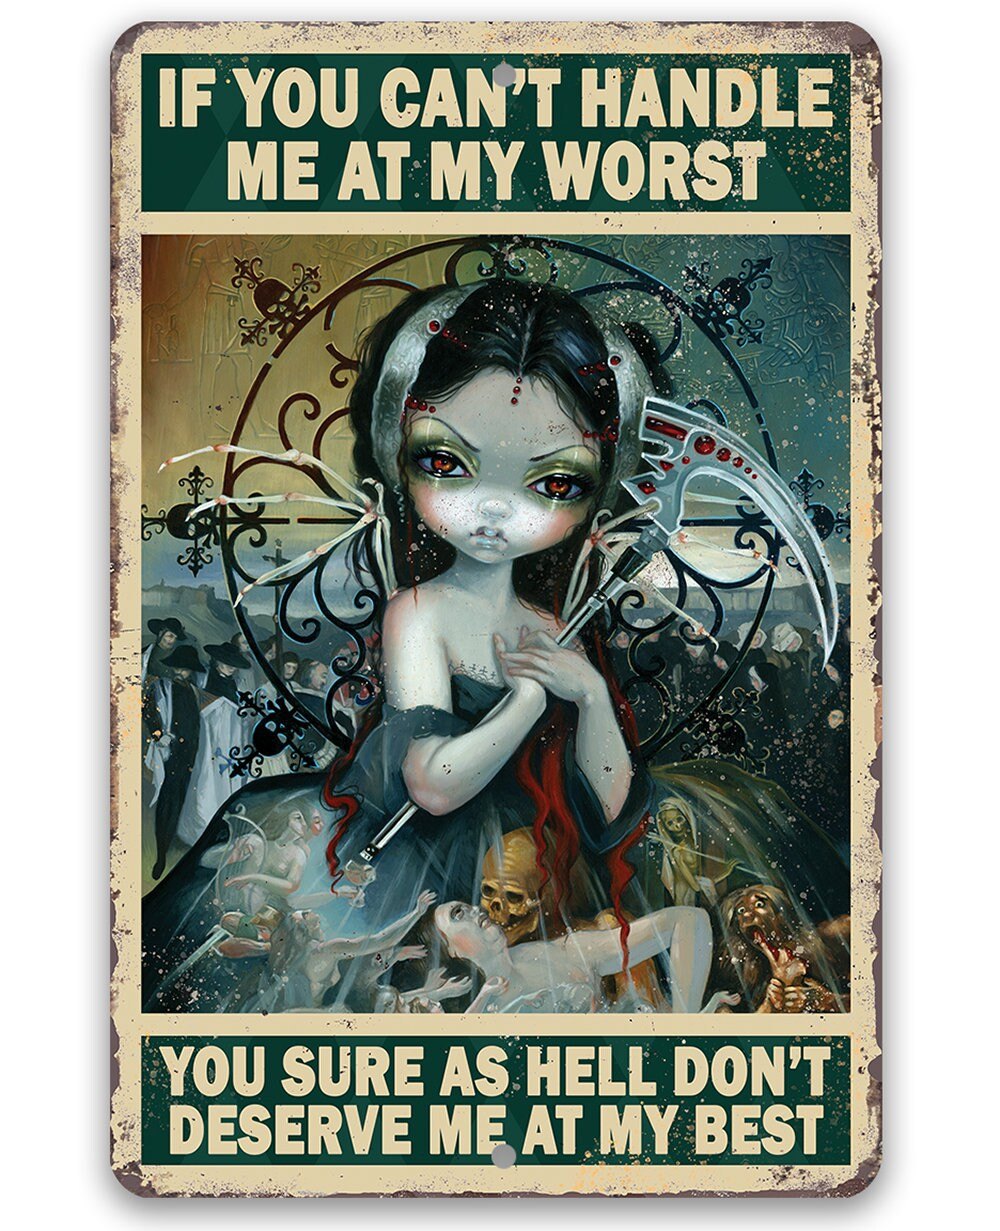 You Don't Deserve Me At My Best - Metal Sign Metal Sign Lone Star Art 